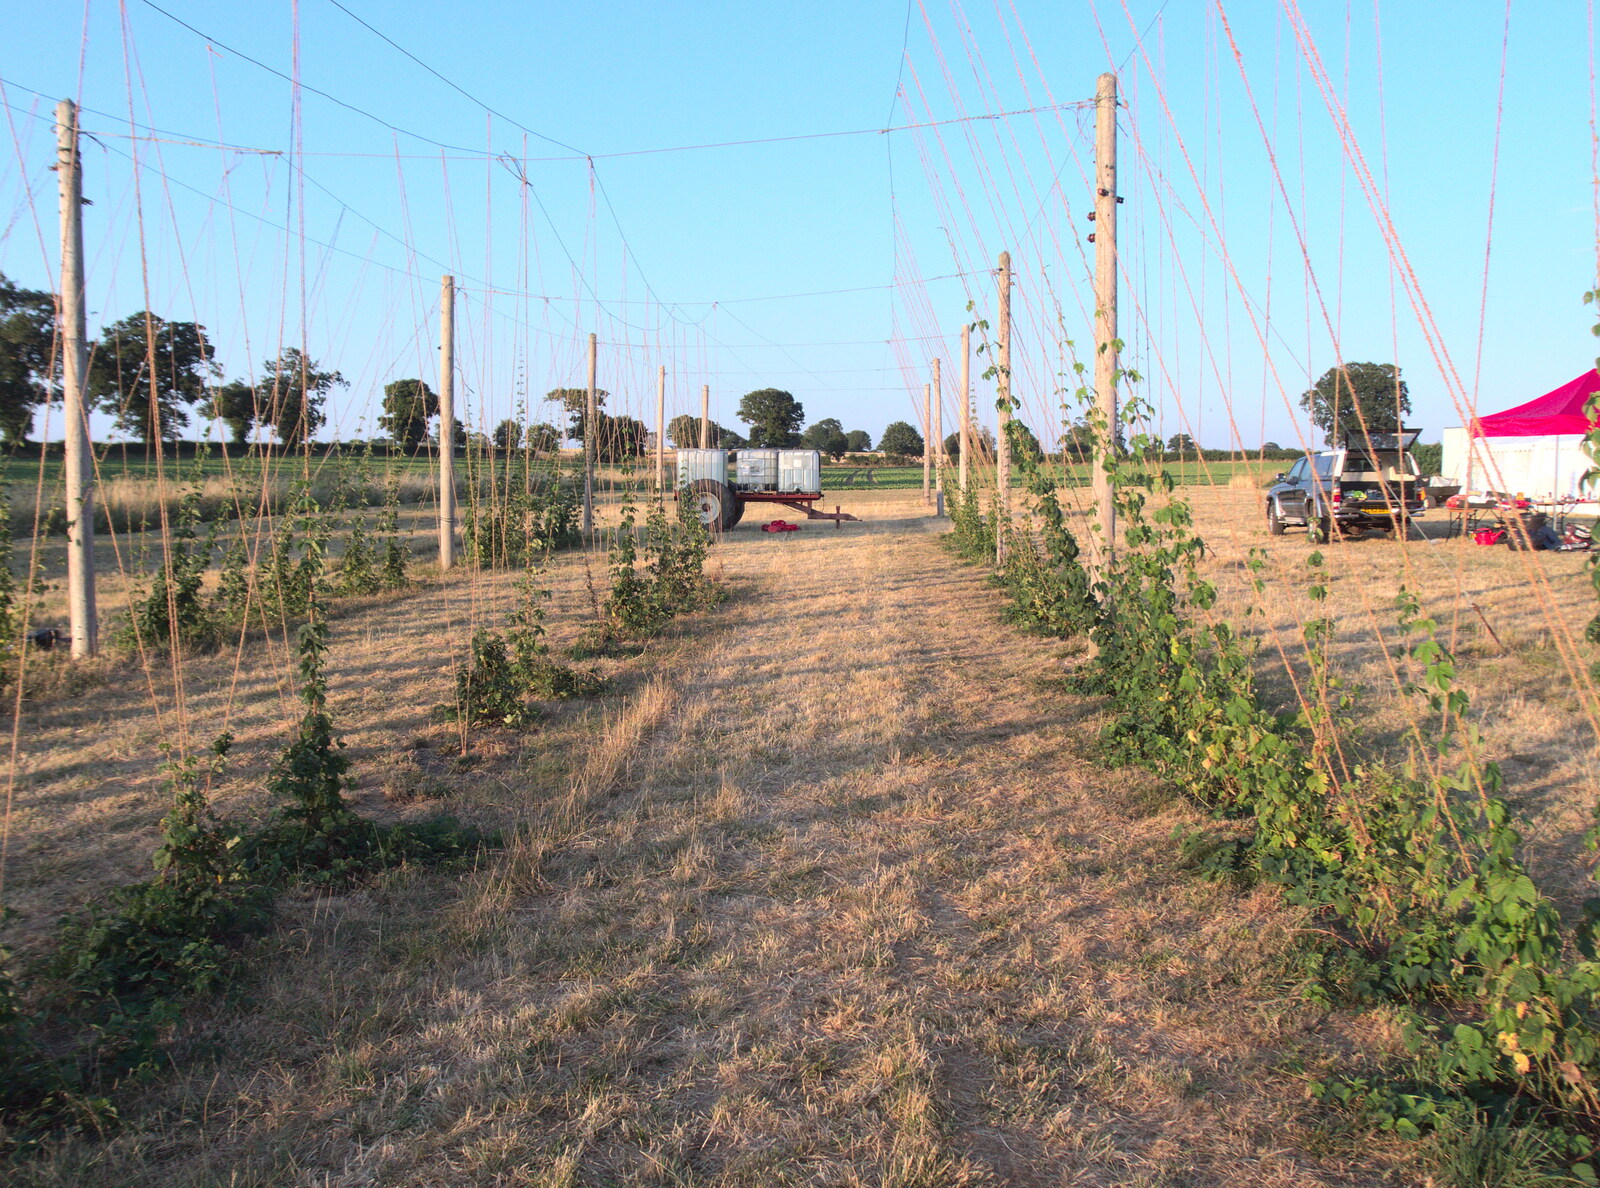 The hop vines from The BSCC Rides to Star Wing Beer Festival, Redgrave, Suffolk - 12th July 2018